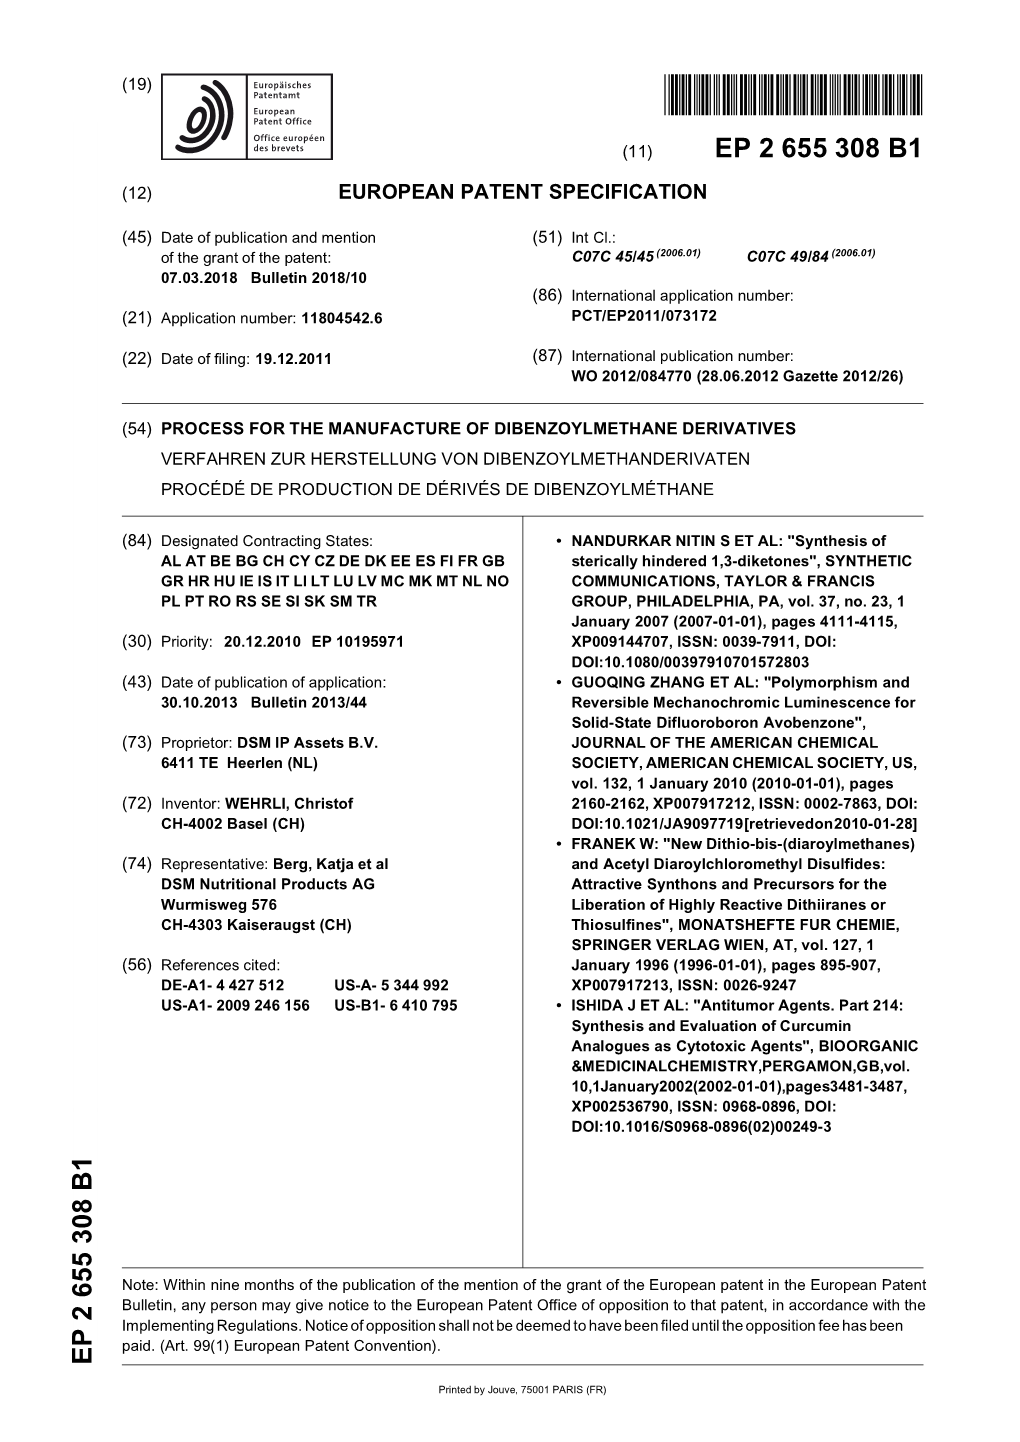 European Patent Office of Opposition to That Patent, in Accordance with the Implementing Regulations